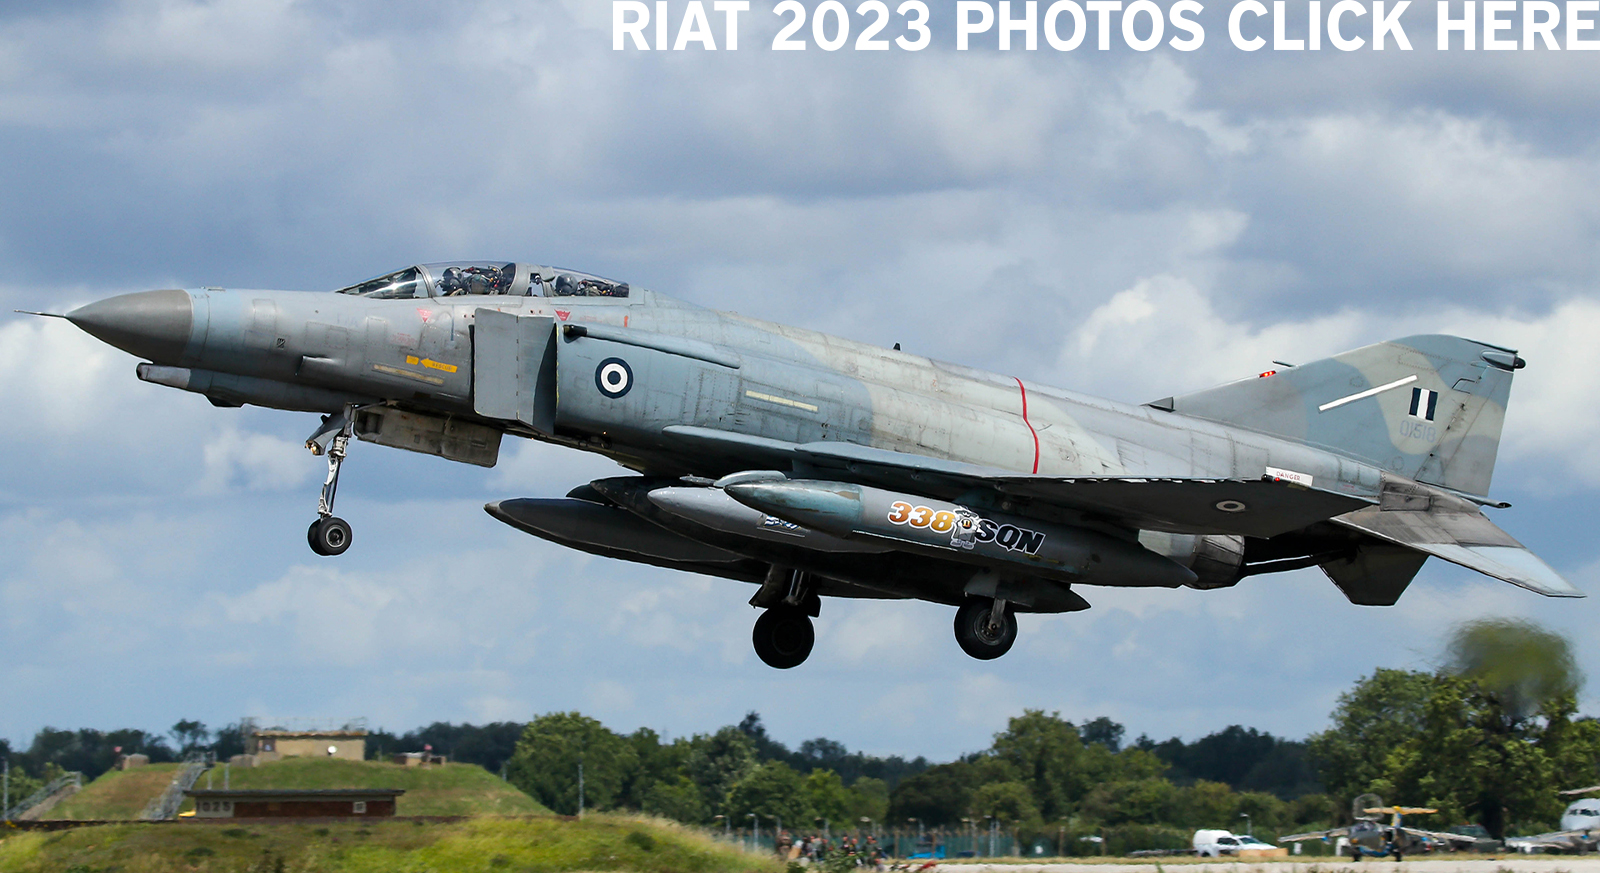 Click here for Royal International Air Tattoo 2022